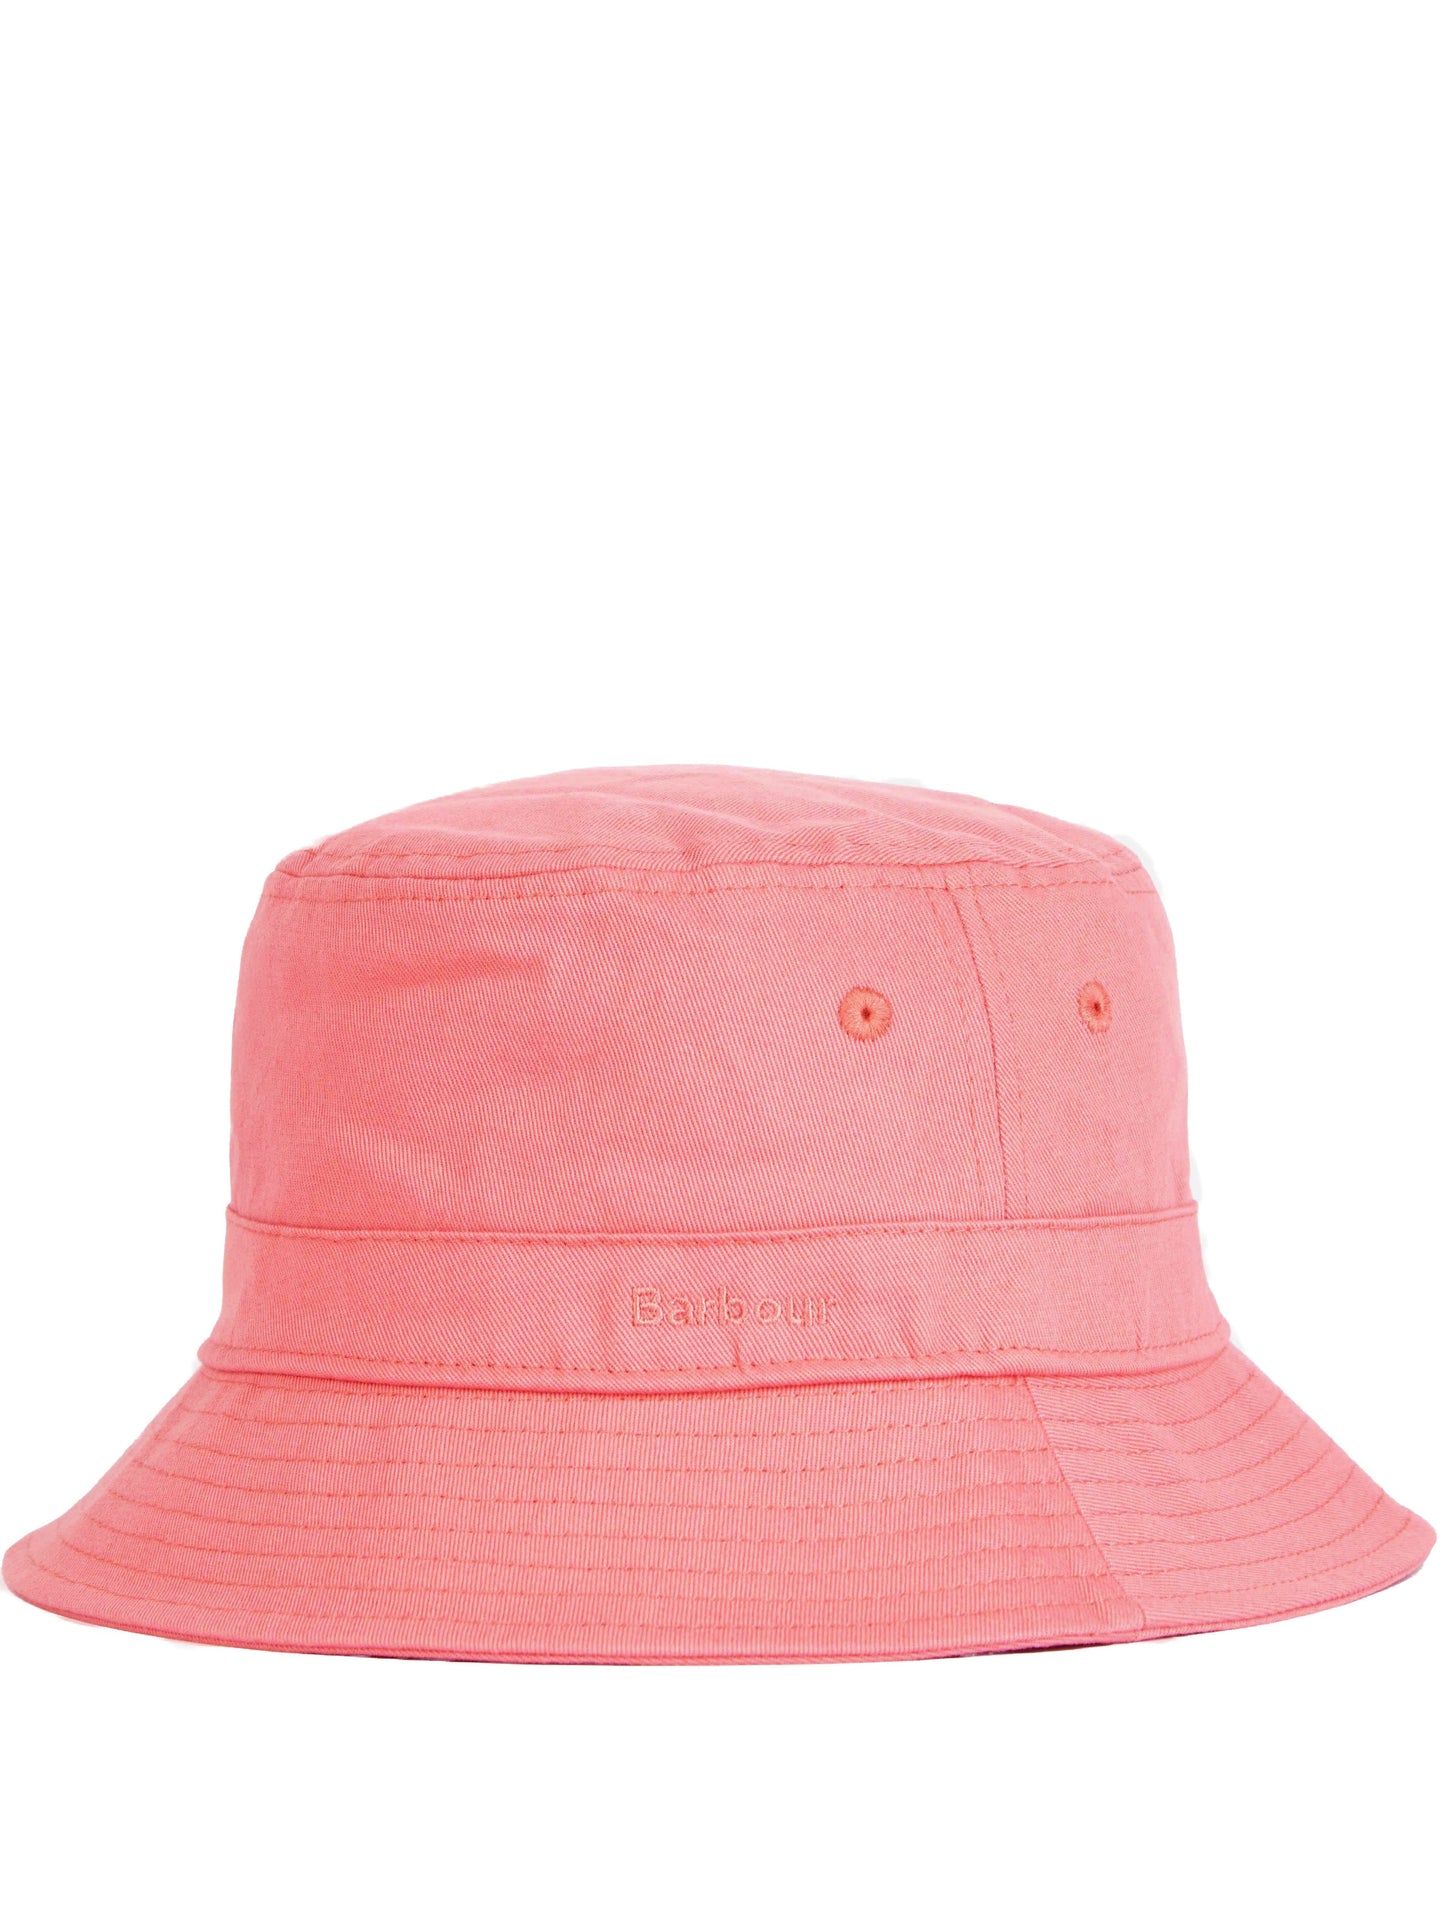 Barbour LHA0508 Olivia Sports Hat cappello donna